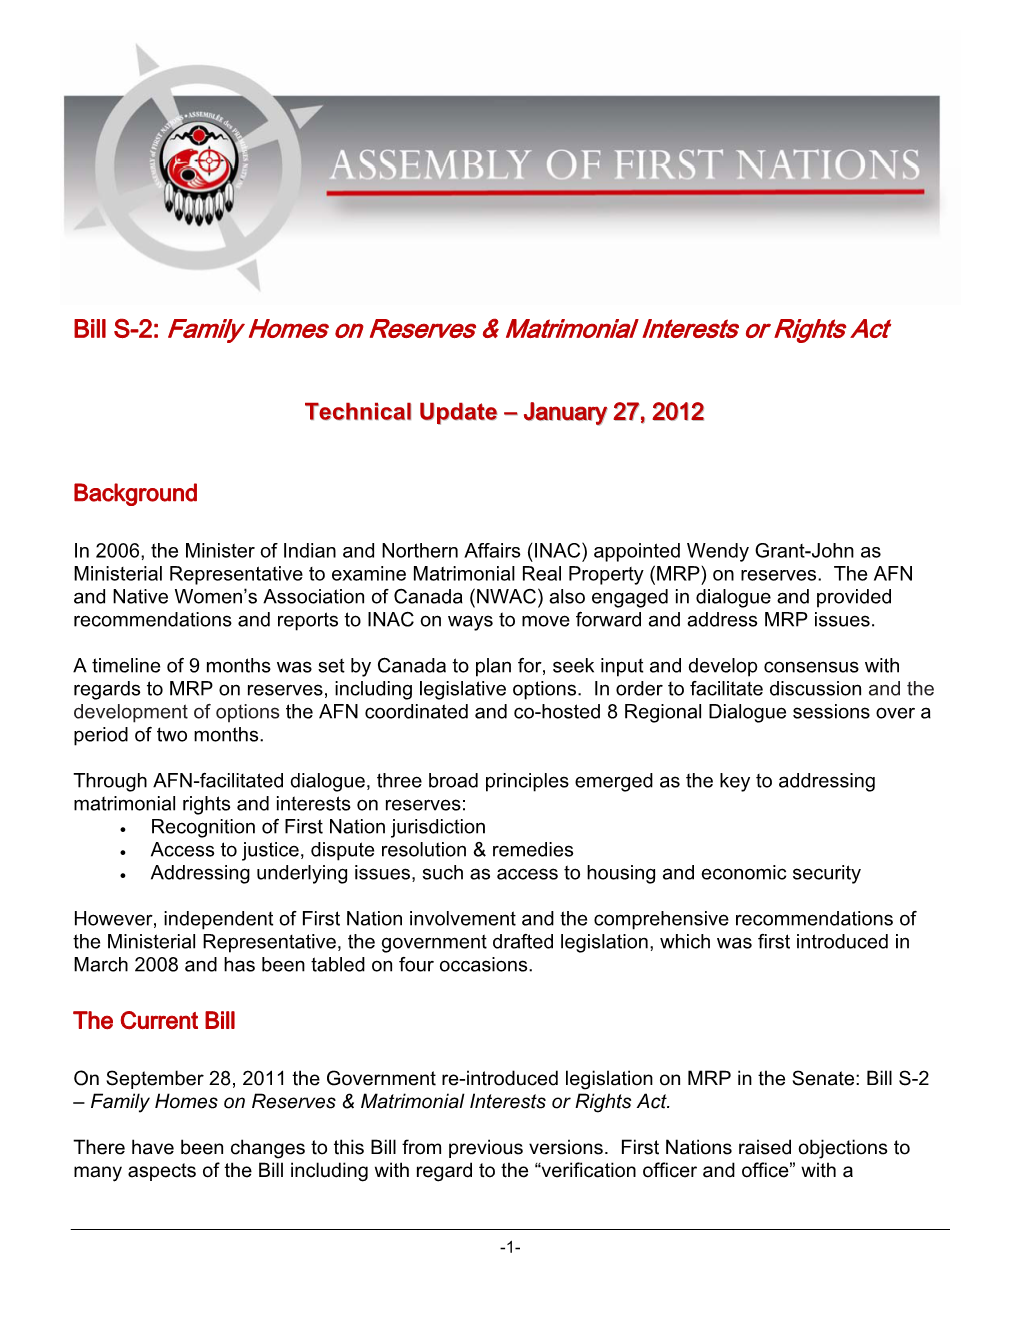 Bill S-2: Family Homes on Reserves & Matrimonial Interests Or Rights Act